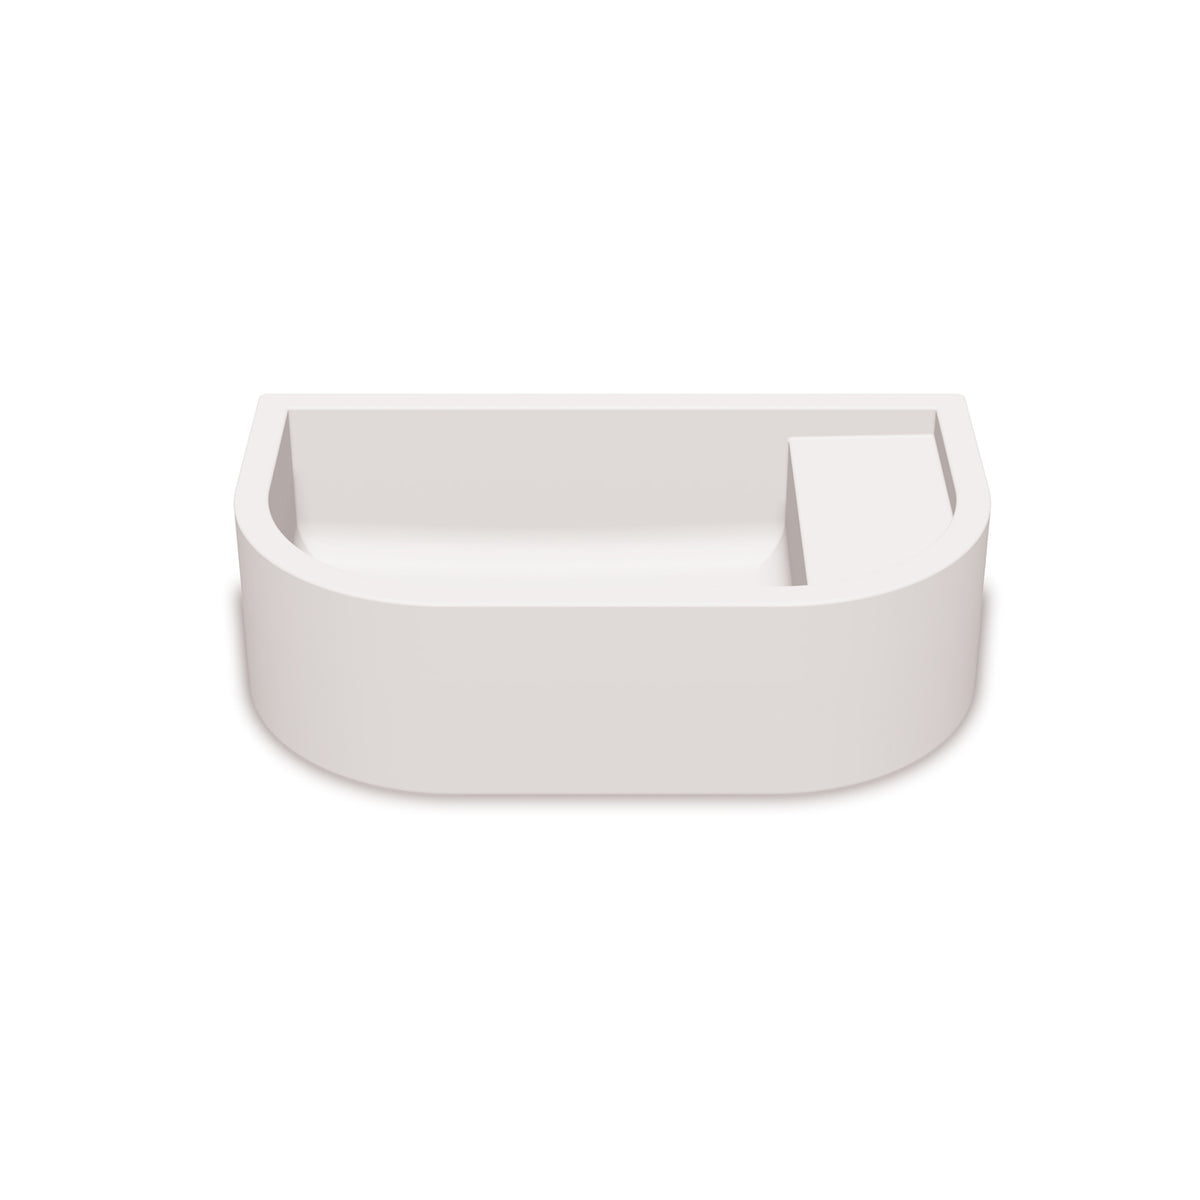 Loop 01 Basin - Overflow - Wall Hung (Ivory,No Tap Hole,Brass)